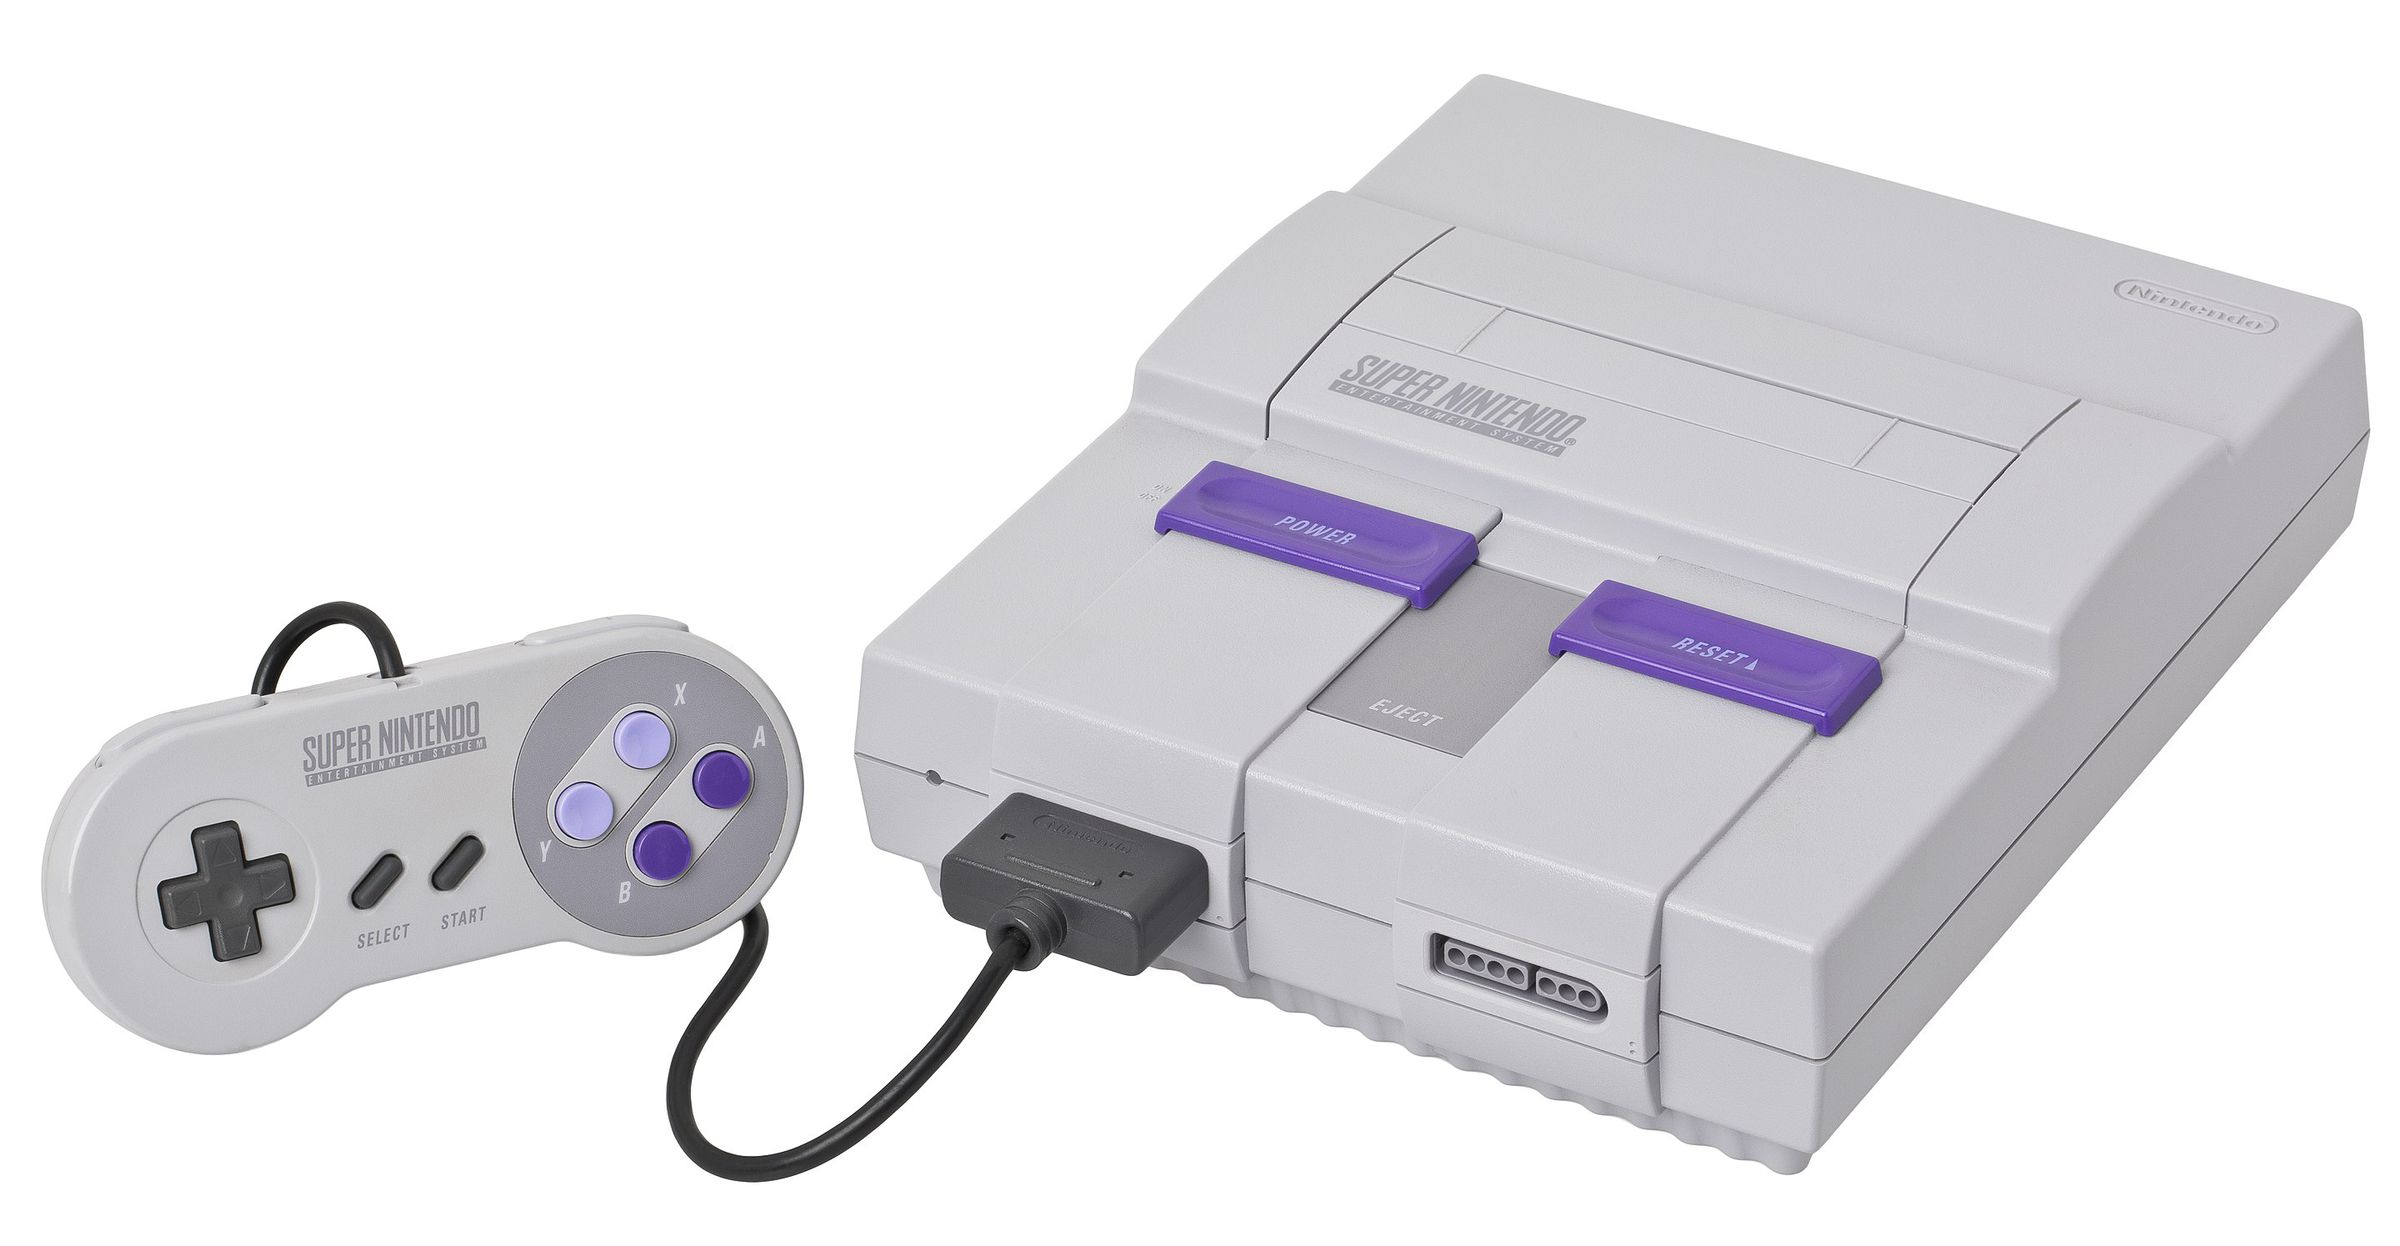 A US Super Nintendo with controller.